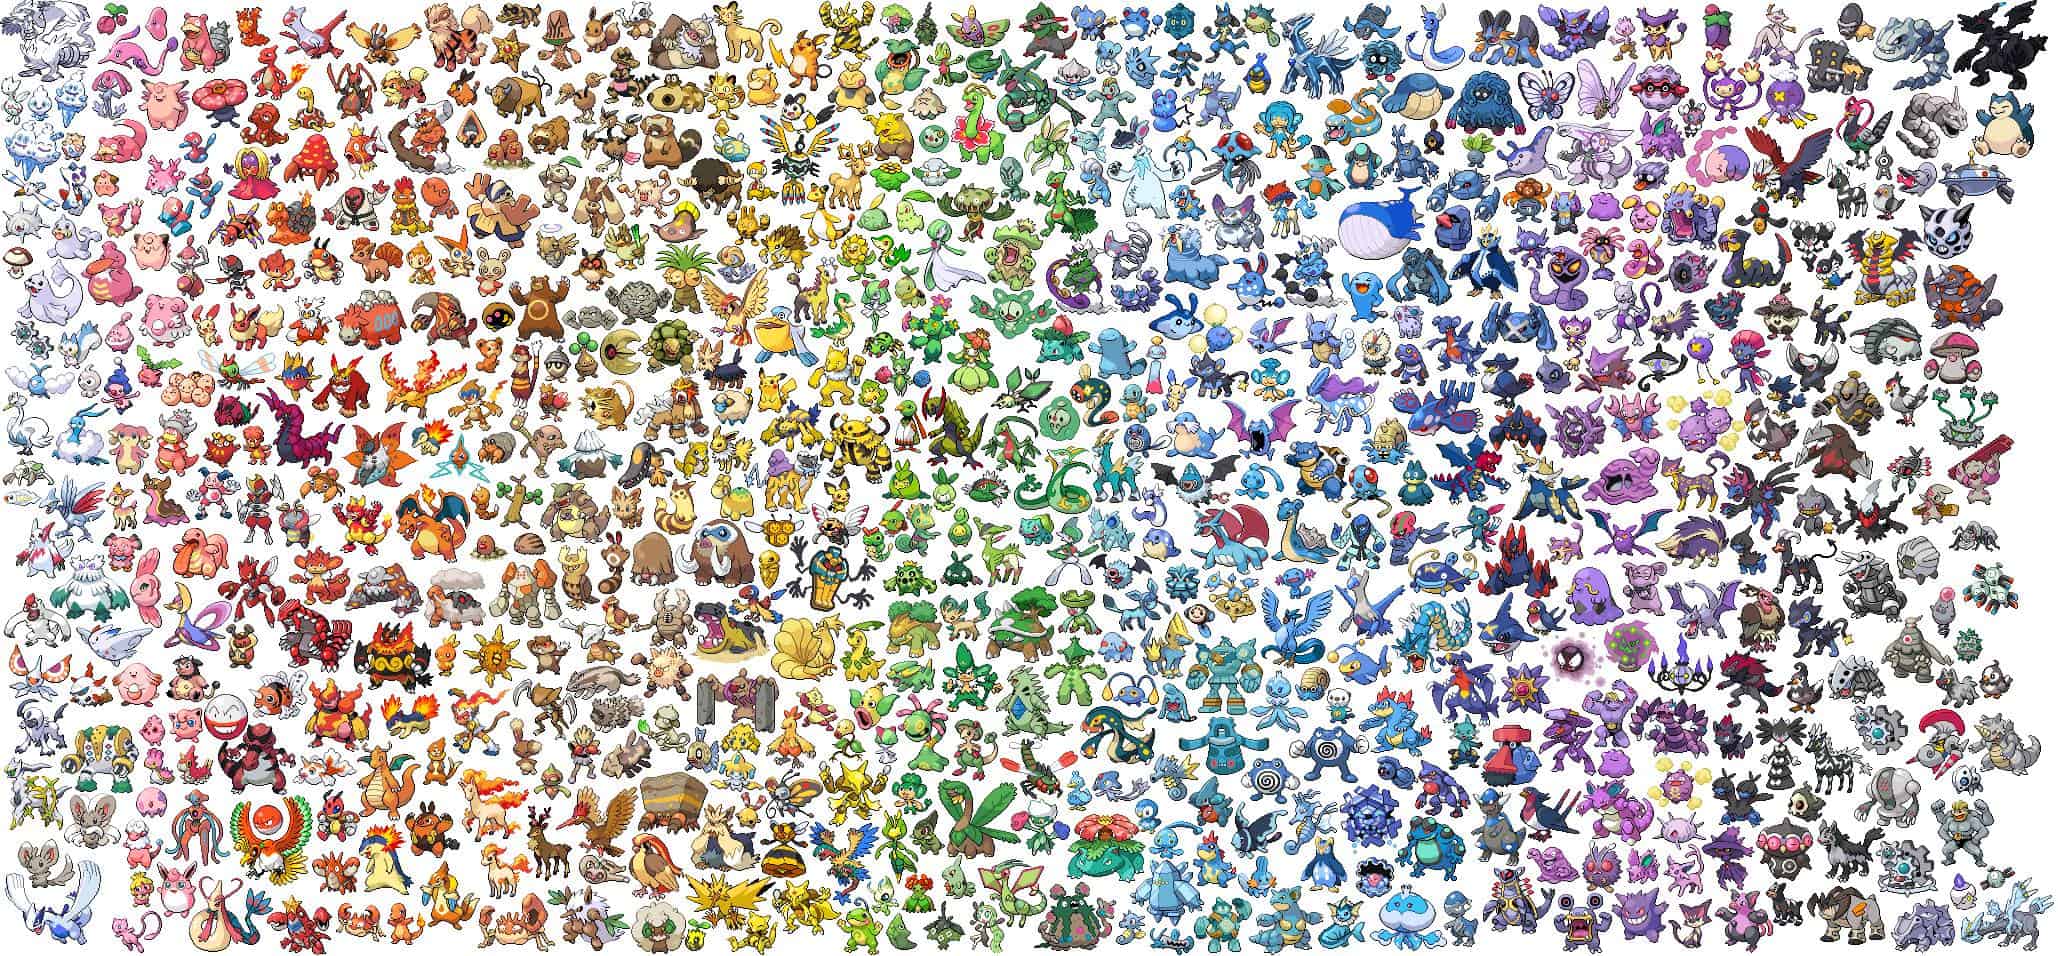 How many Pokémon are there in 2022?